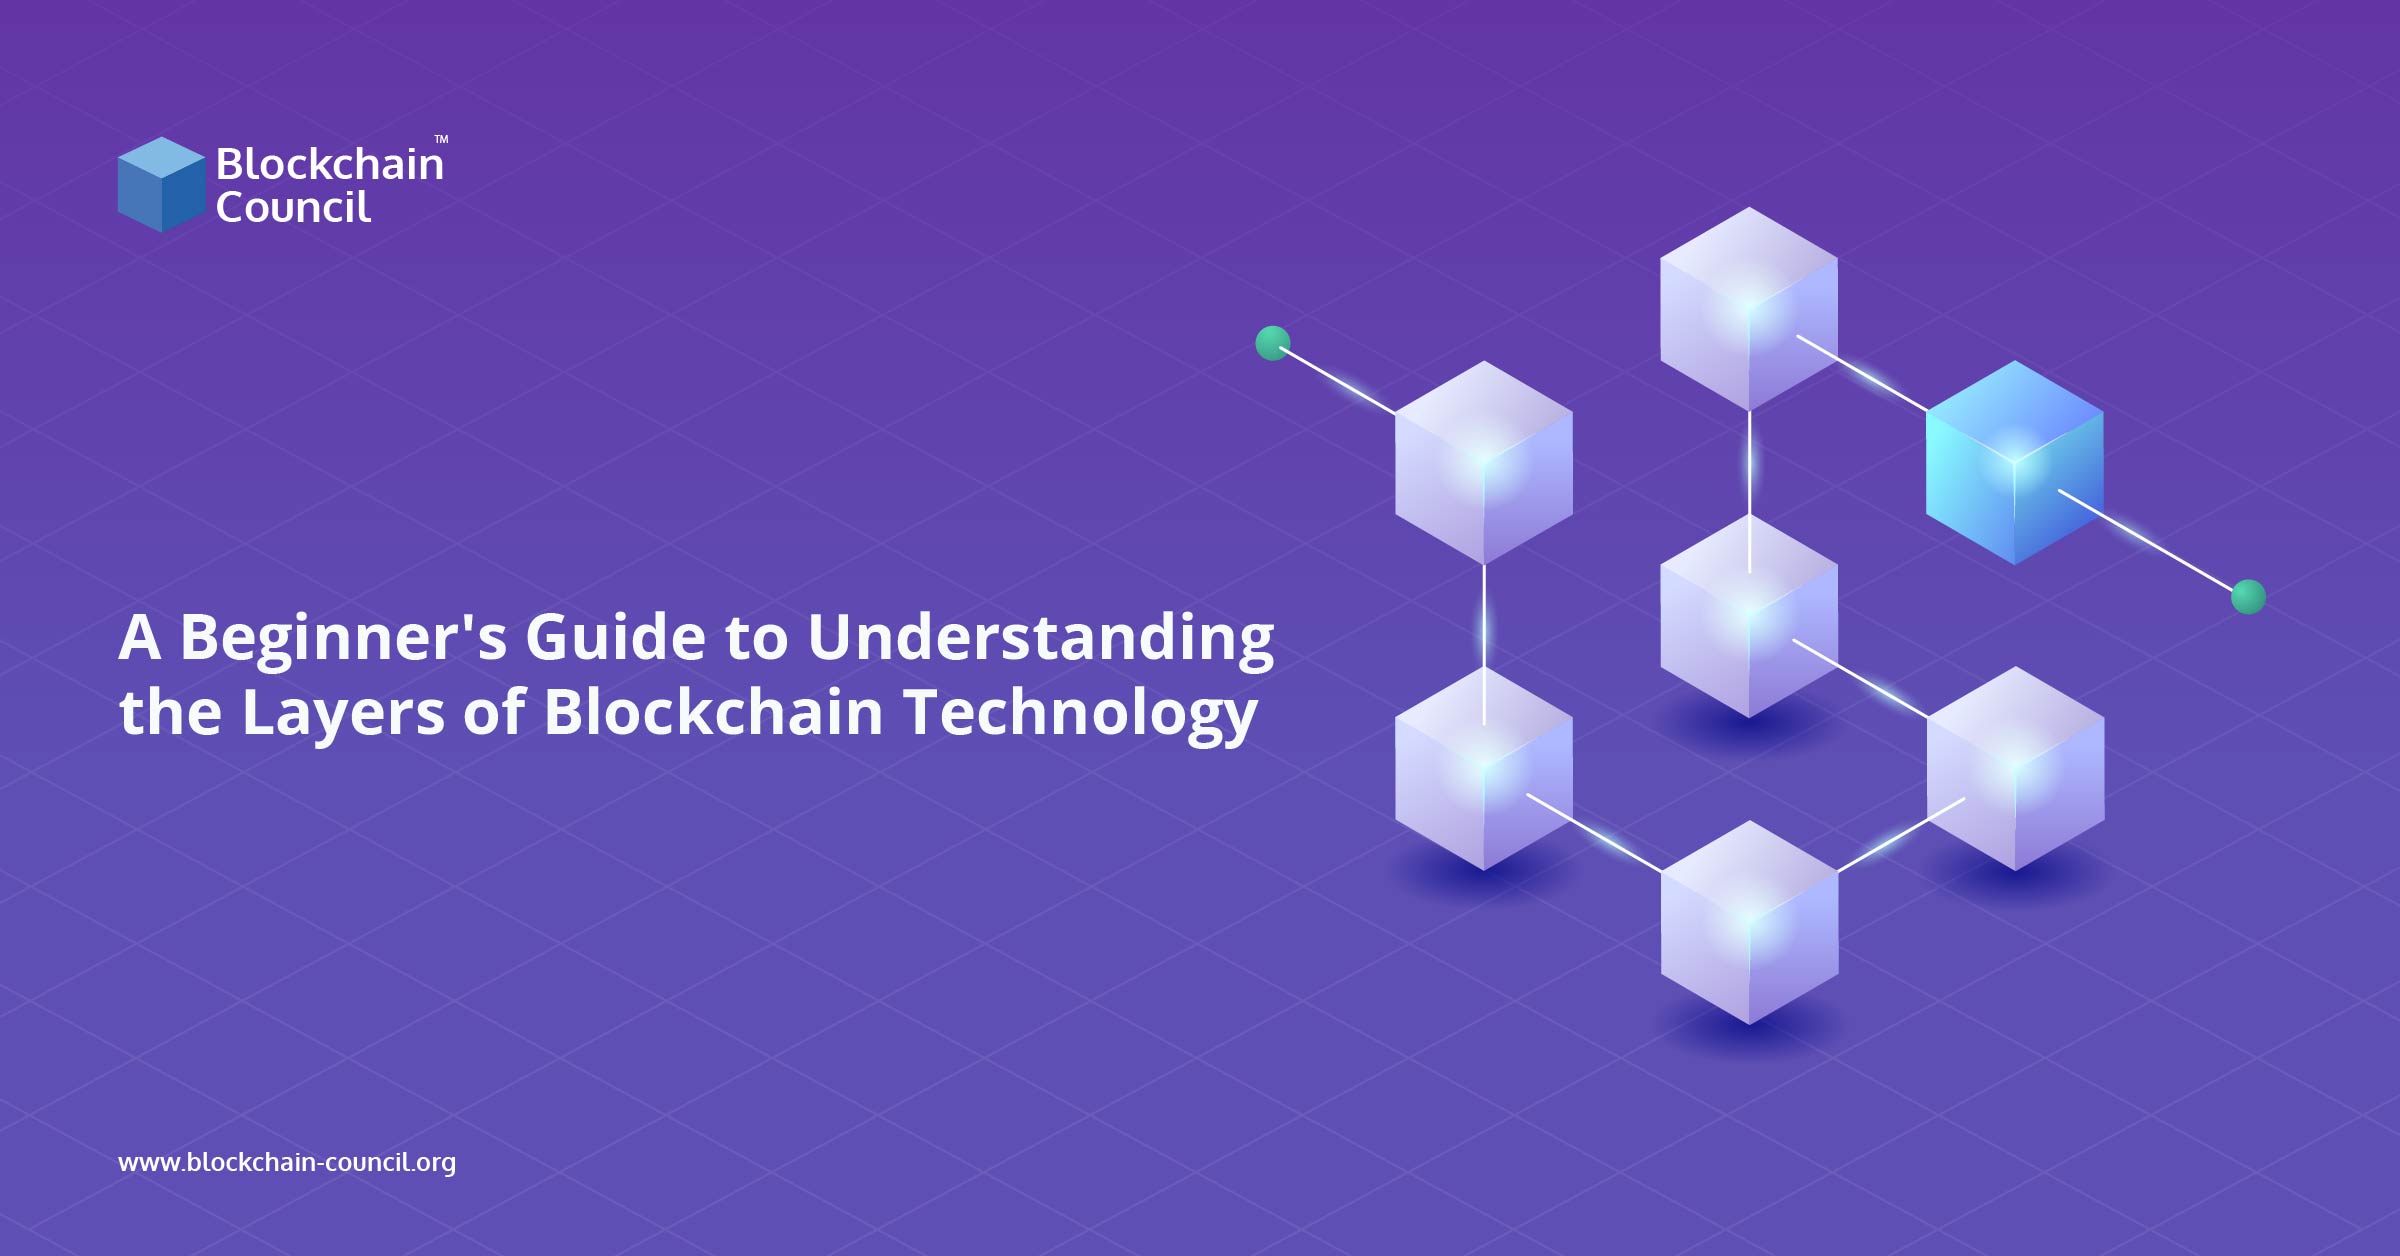 A Beginner's Guide to Understanding the Layers of Blockchain Technology